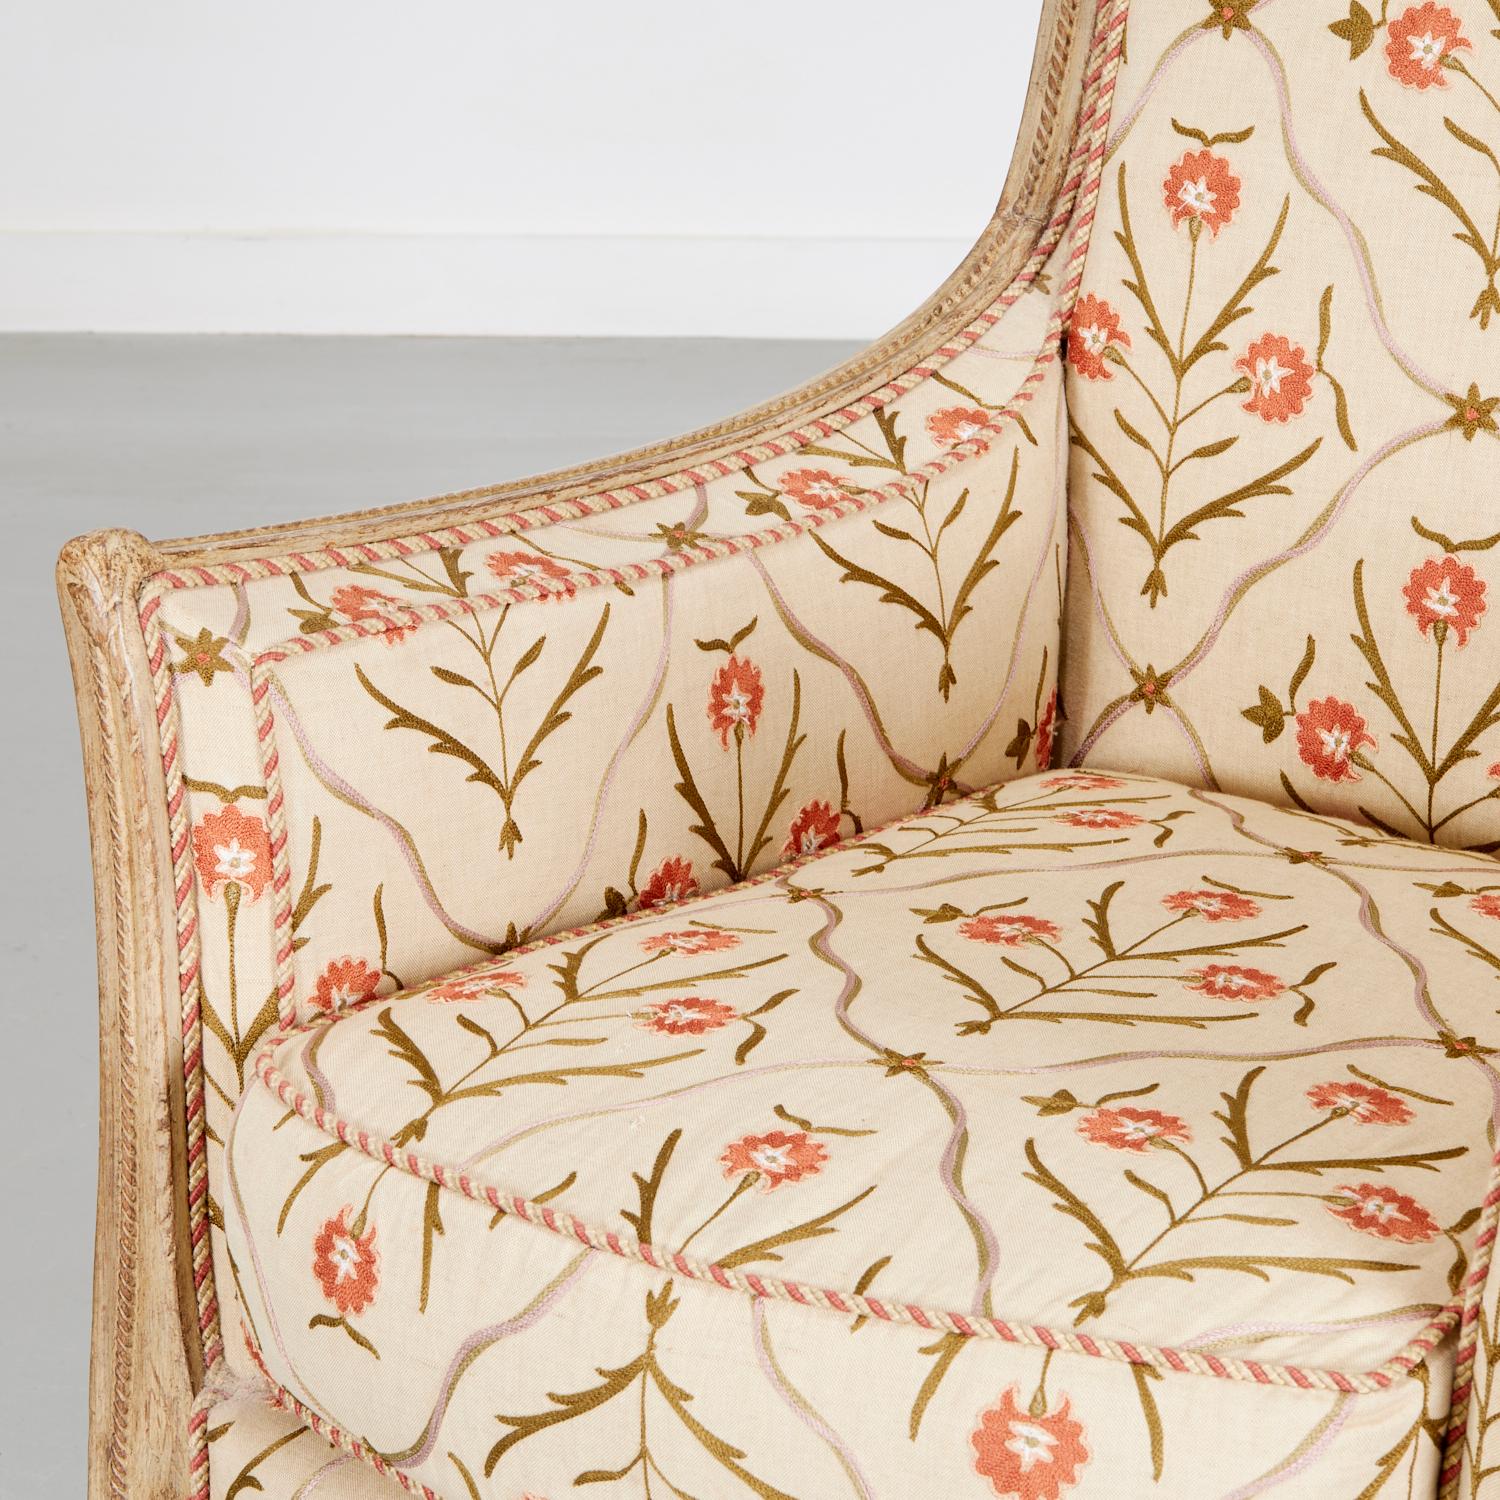 American 20th C. Directoire Style Painted and Floral Crewelwork Upholstered Bregere For Sale